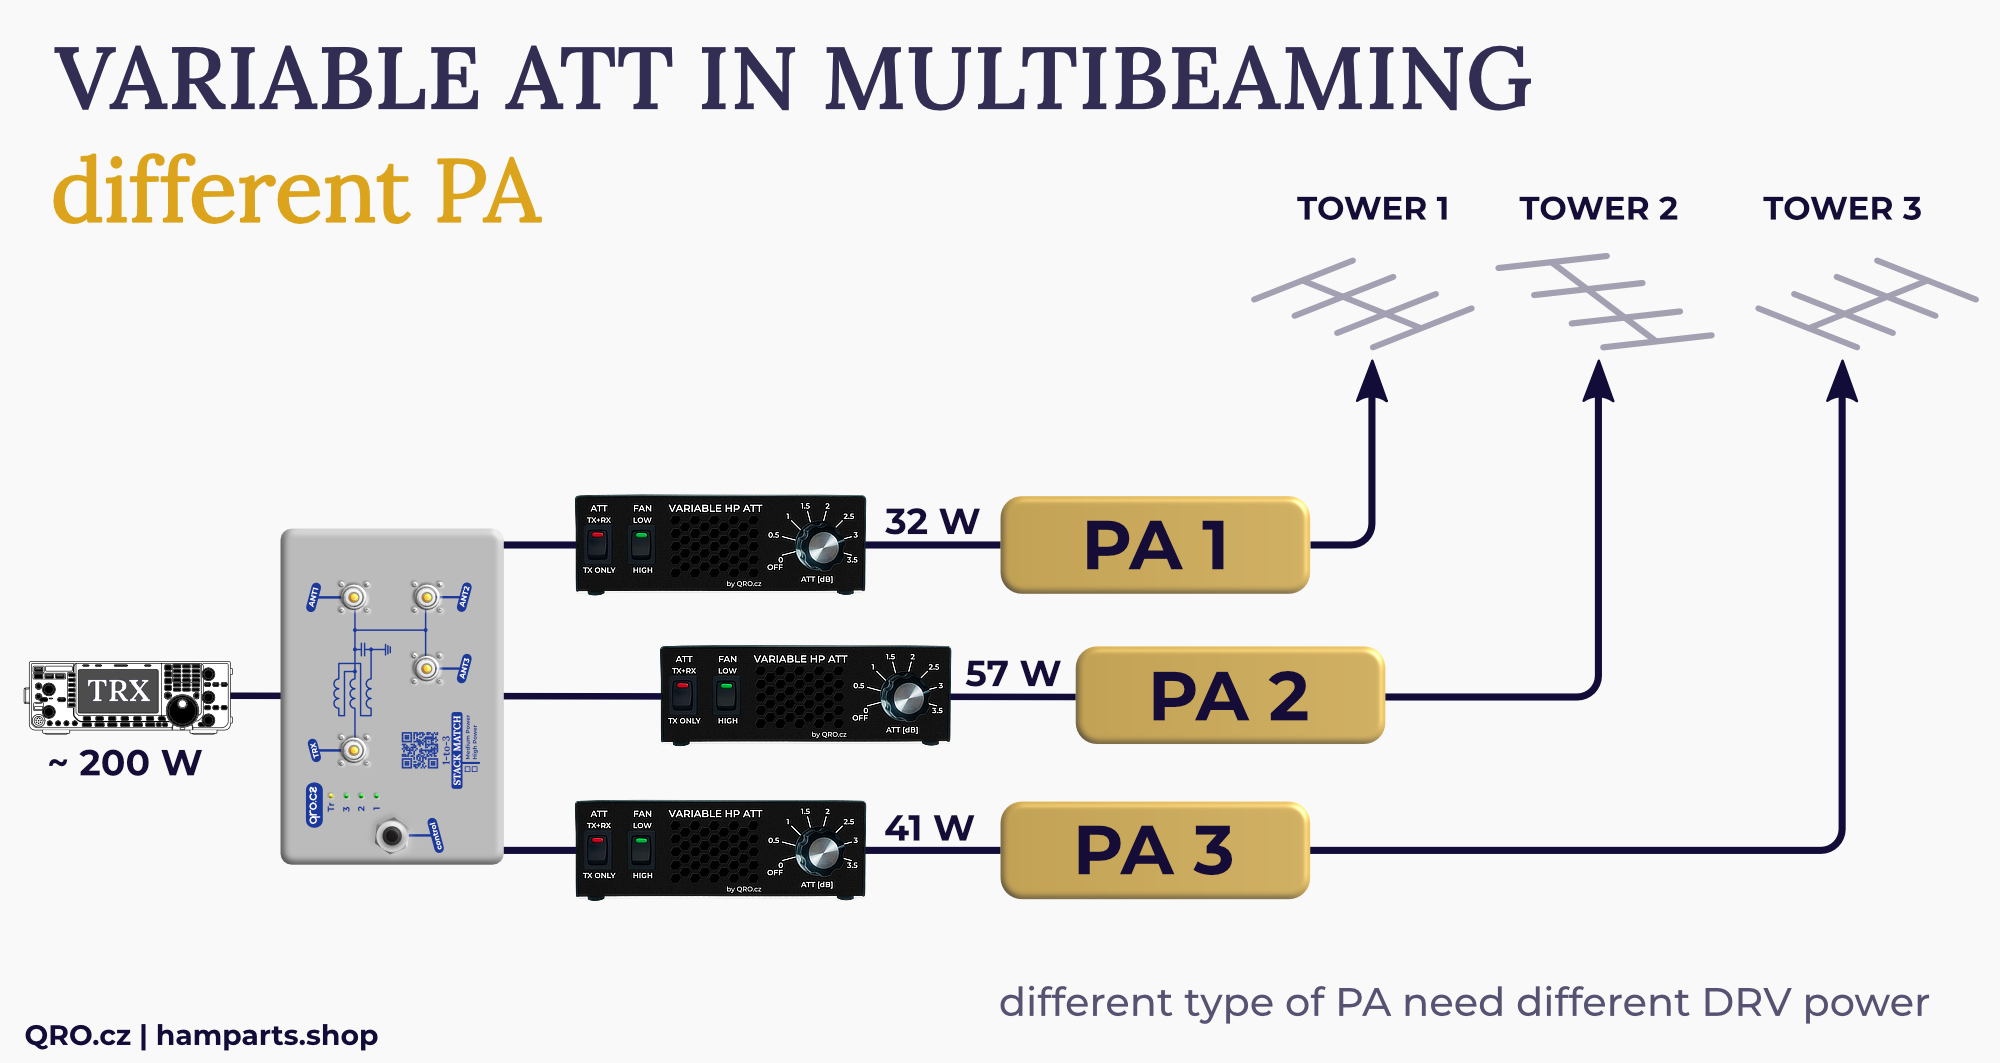 attenuator with stack match 1-3 and different power amplifiers PA example by qro.cz hamparts.shop